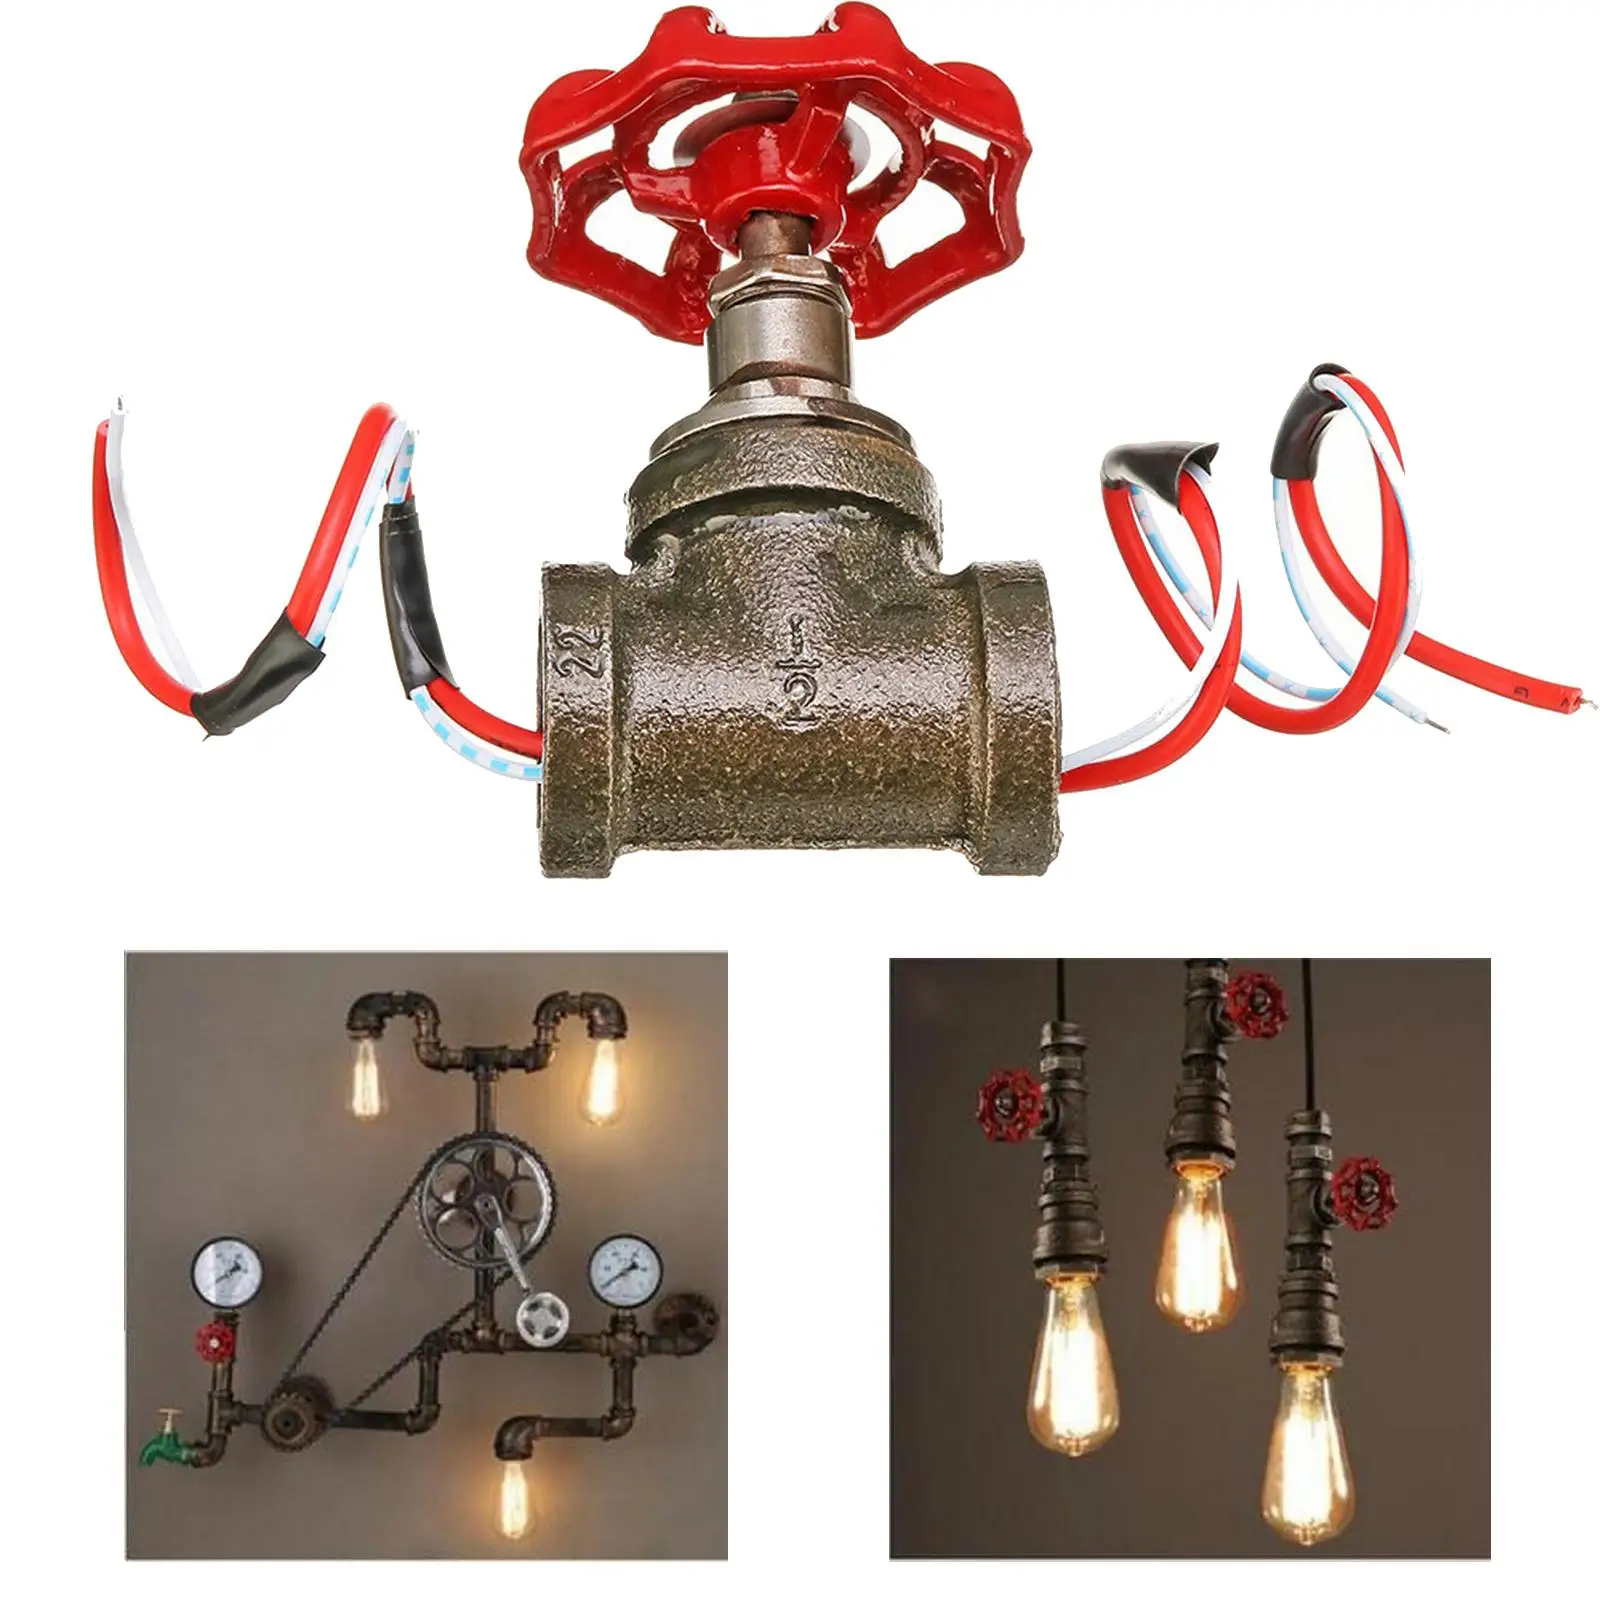 3/4in Globe Valve Light Switch Vintage with Electric Wire Accessory Steampunk Style Parts Supplies for Desk Lamp Pipe Lamp Shop